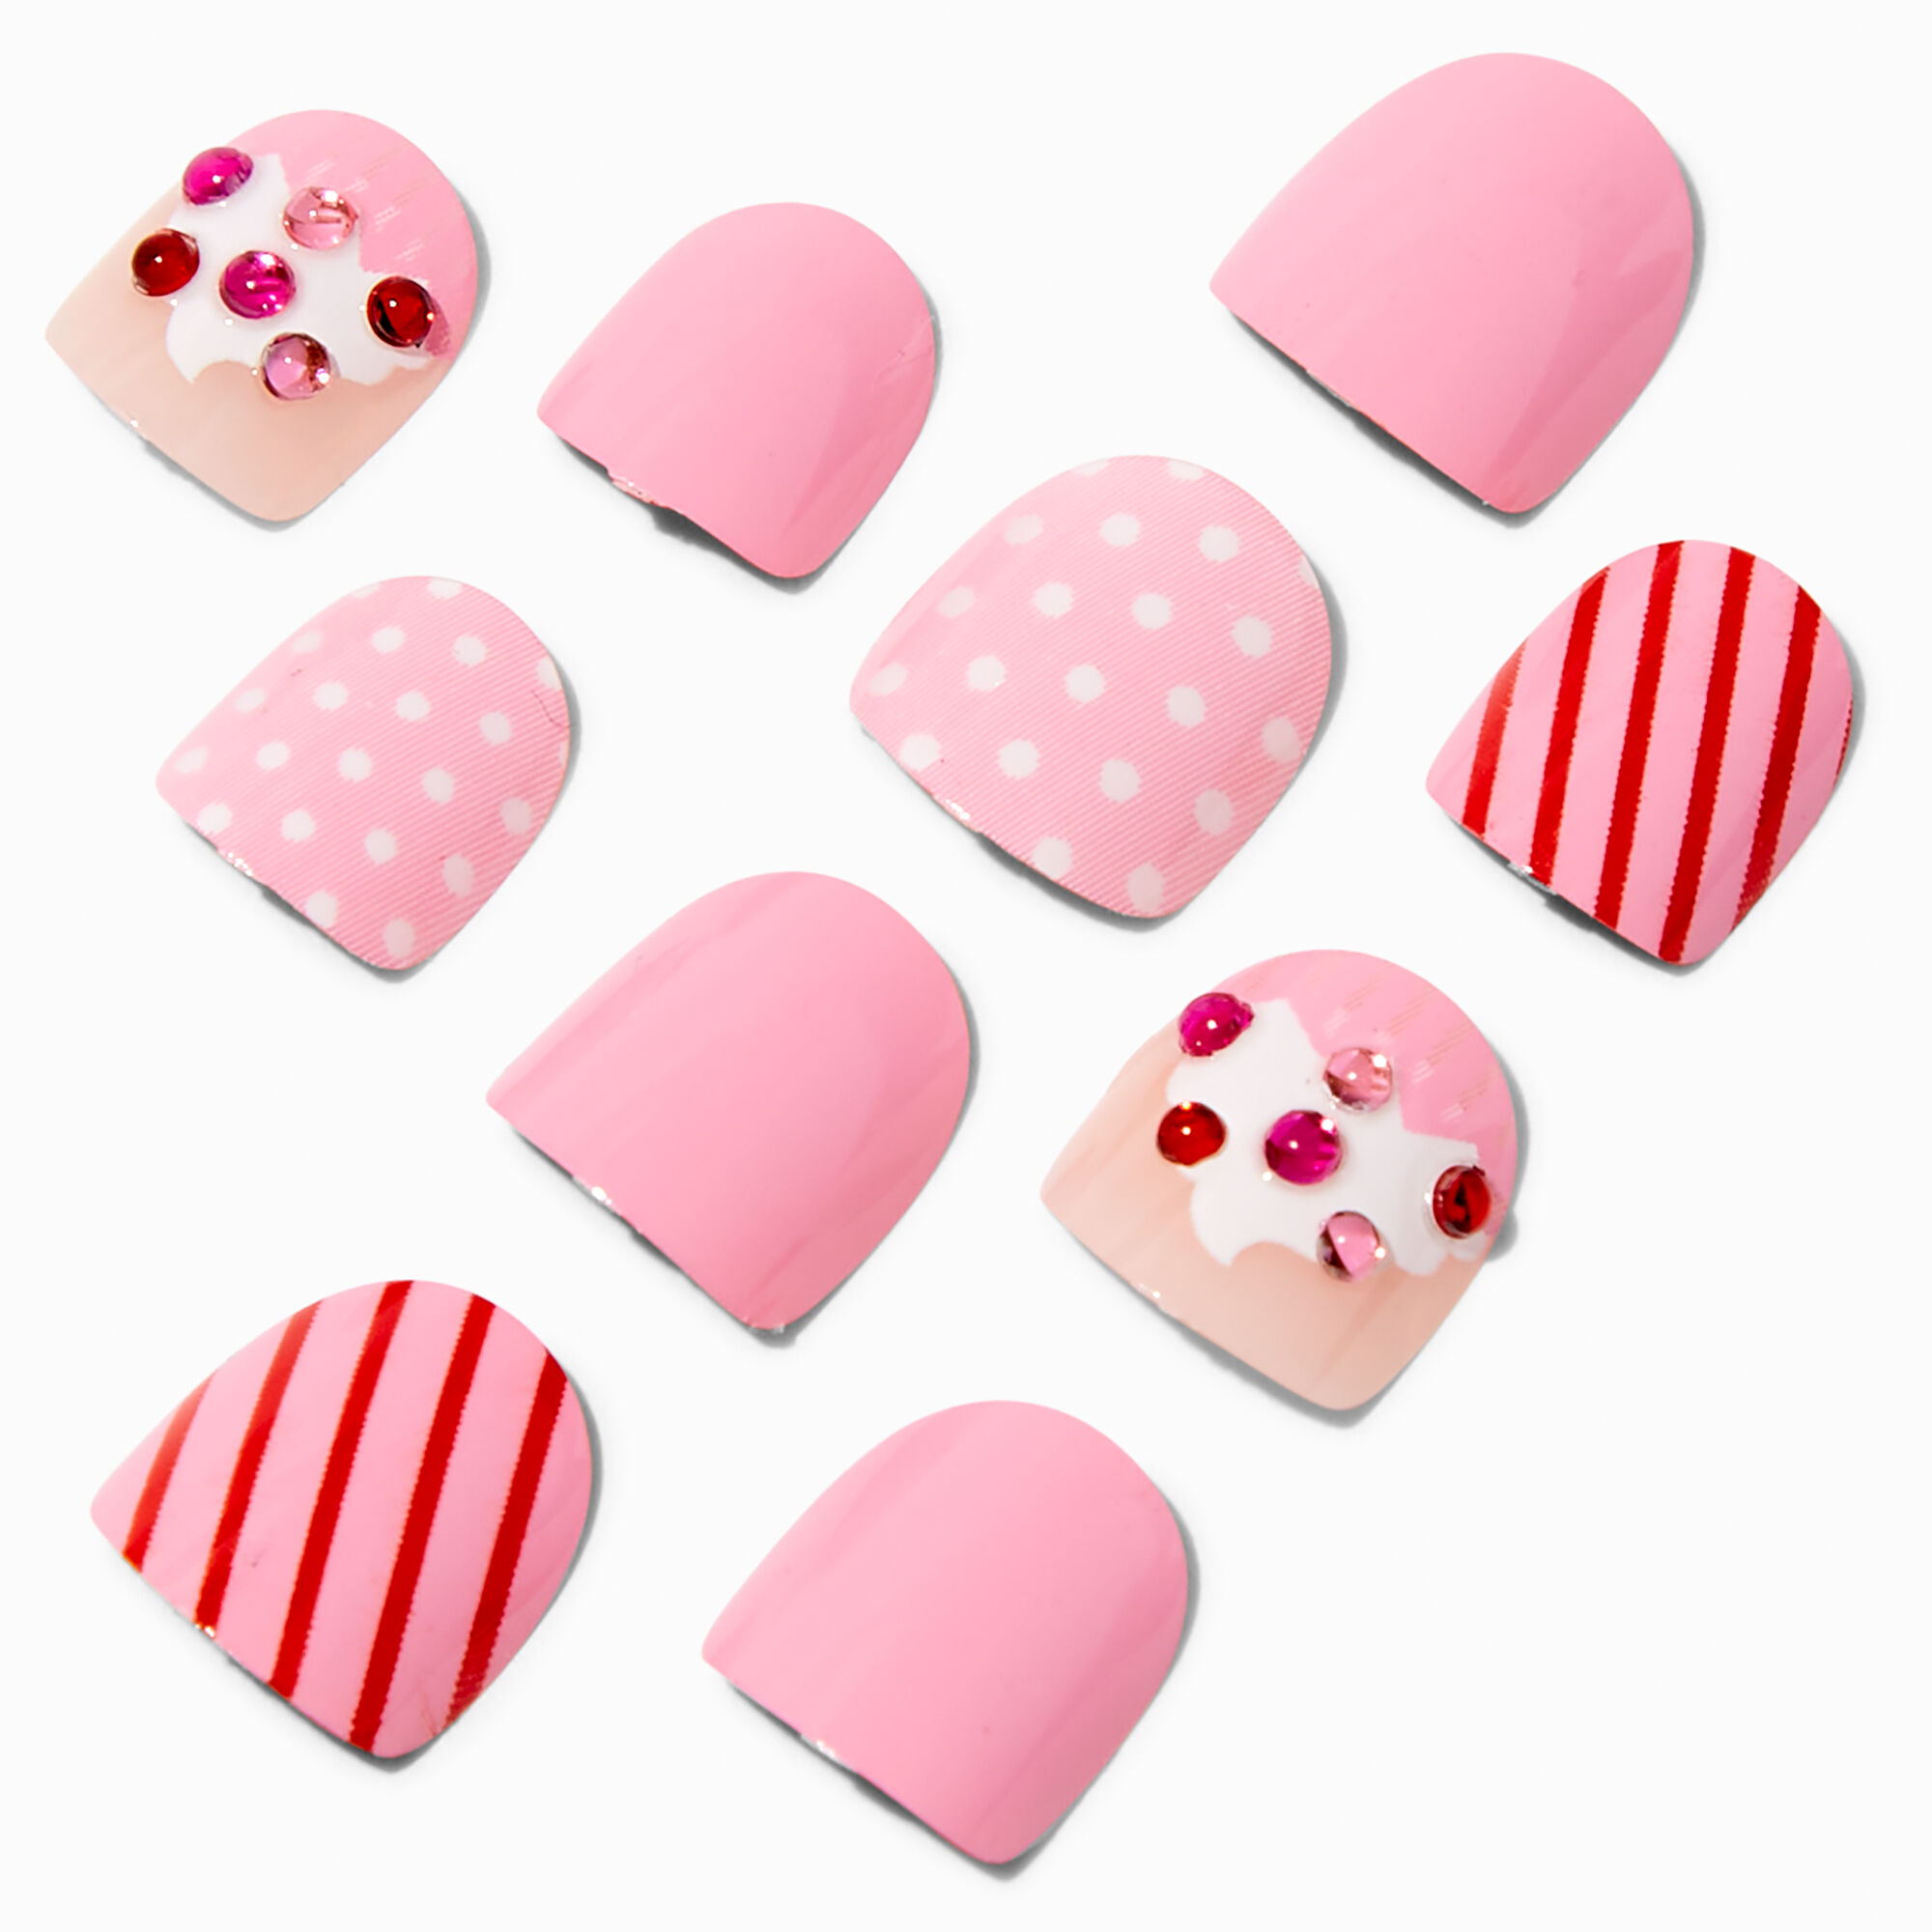 View Claires Club Cupcake Press On Vegan Faux Nail Set 10 Pack information